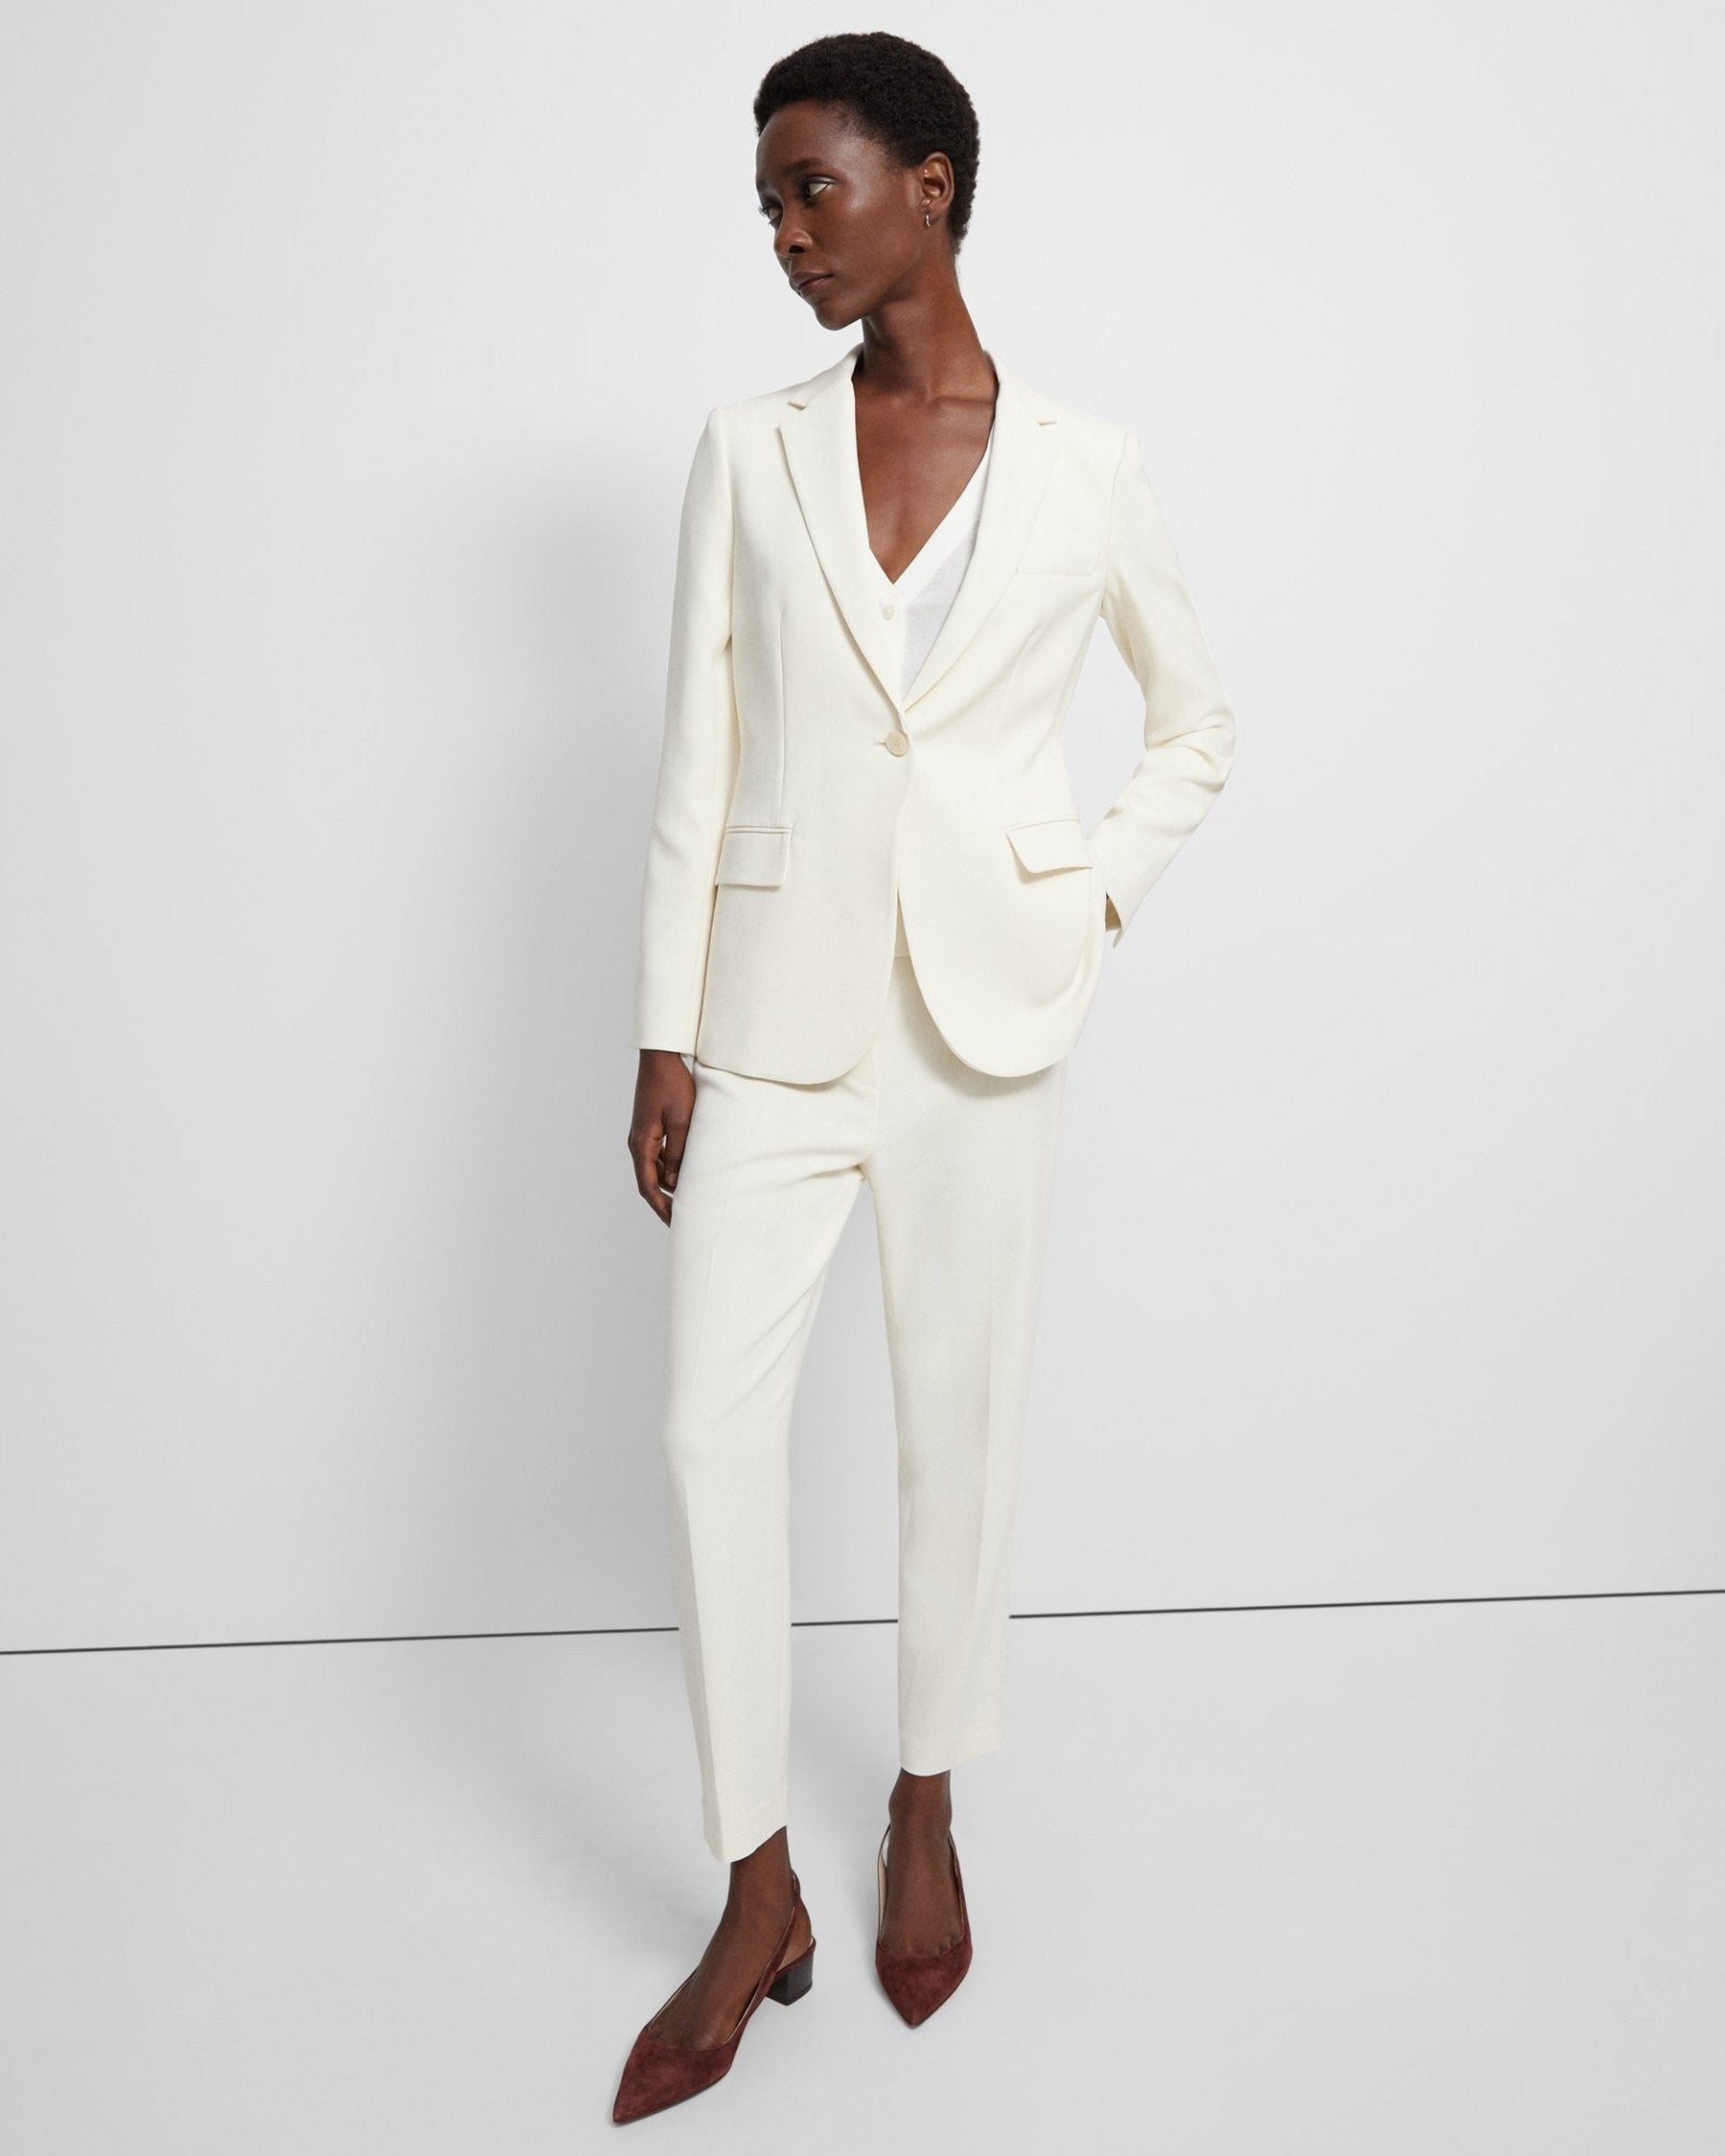 Theory + Staple Blazer in Admiral Crepe